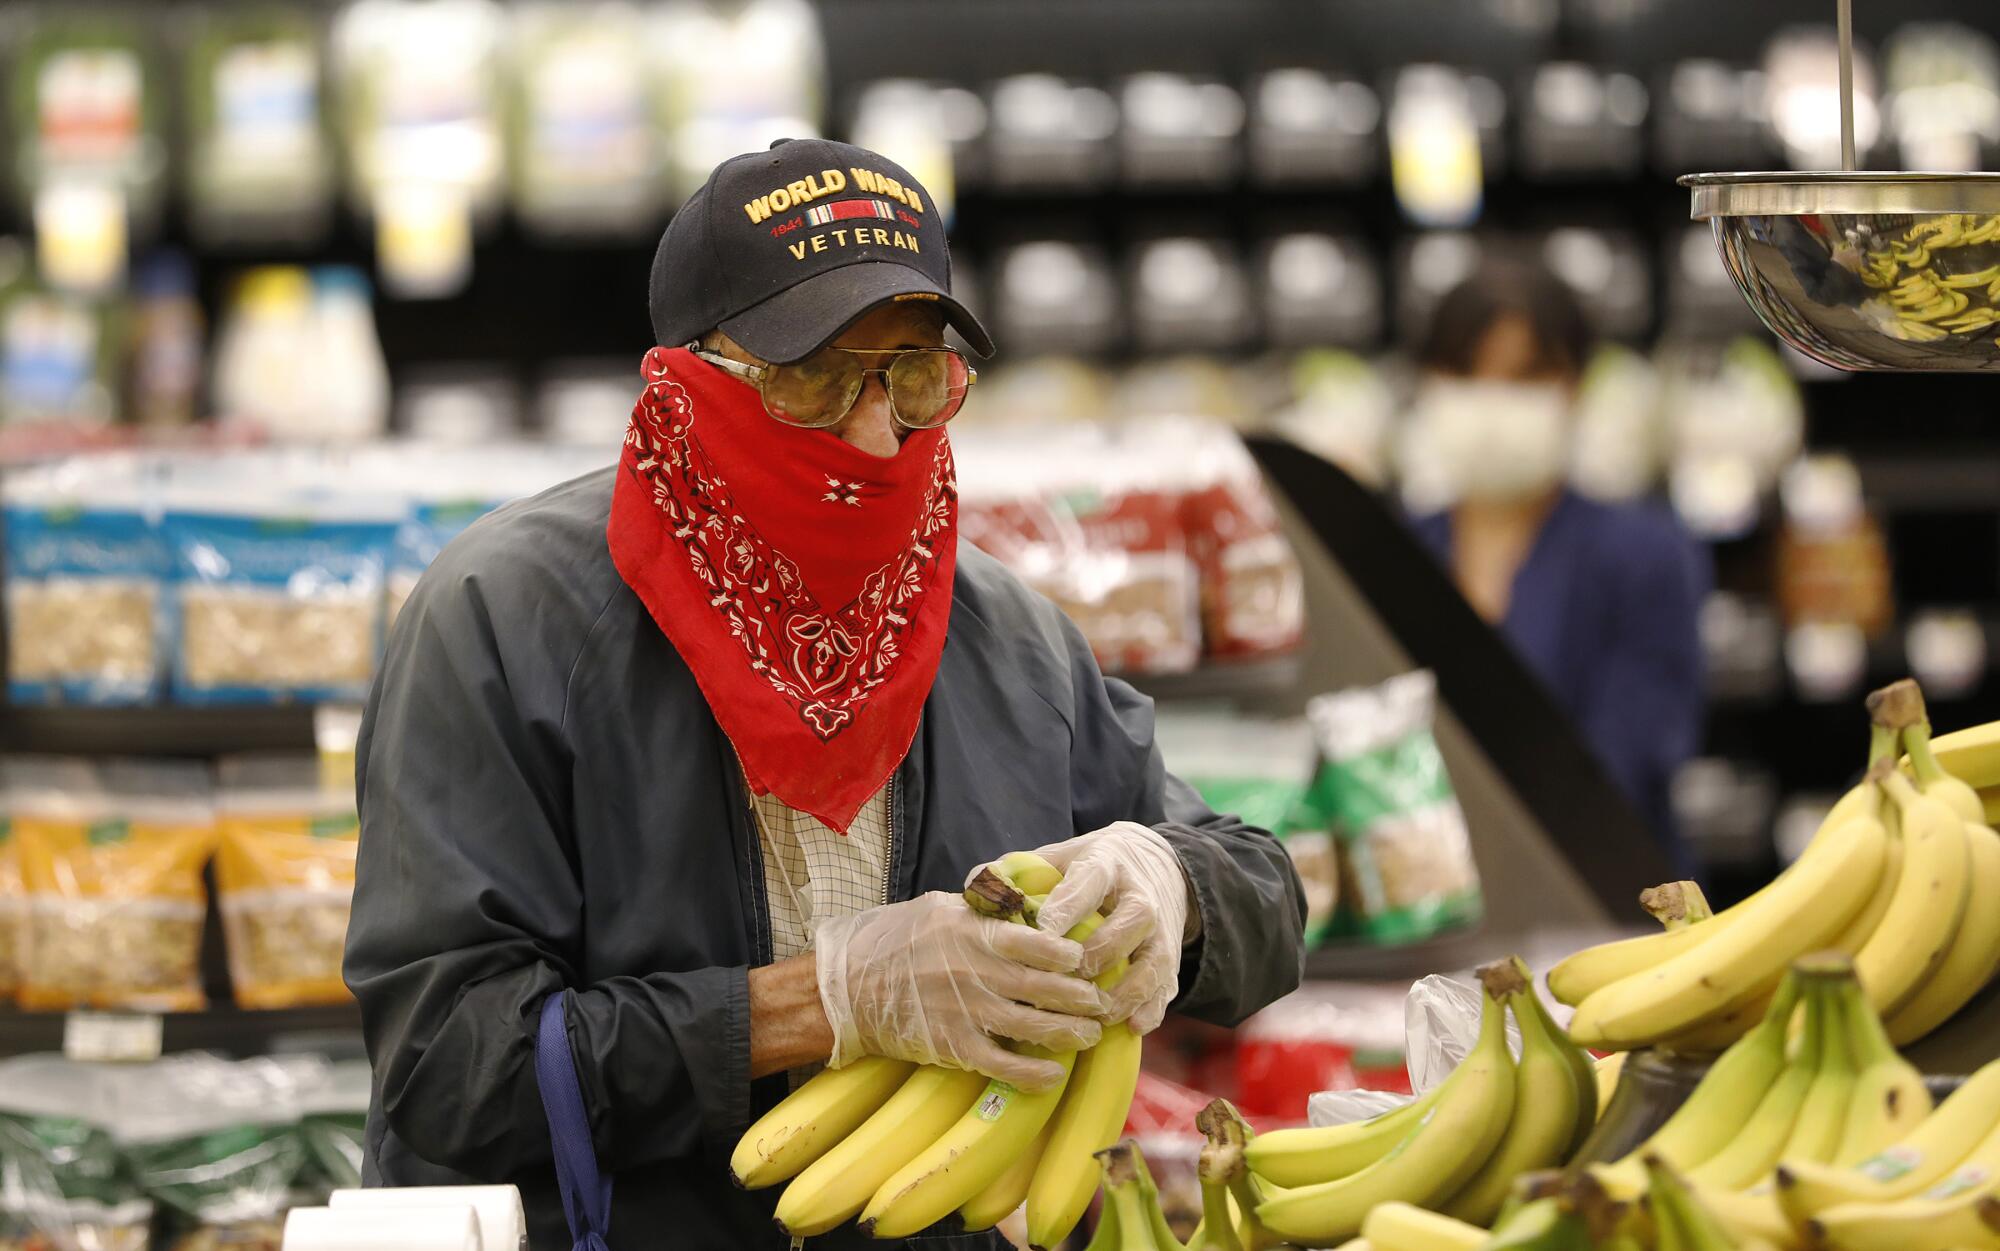 A 93-year-old World War II veteran shops at a Vons in Torrance.